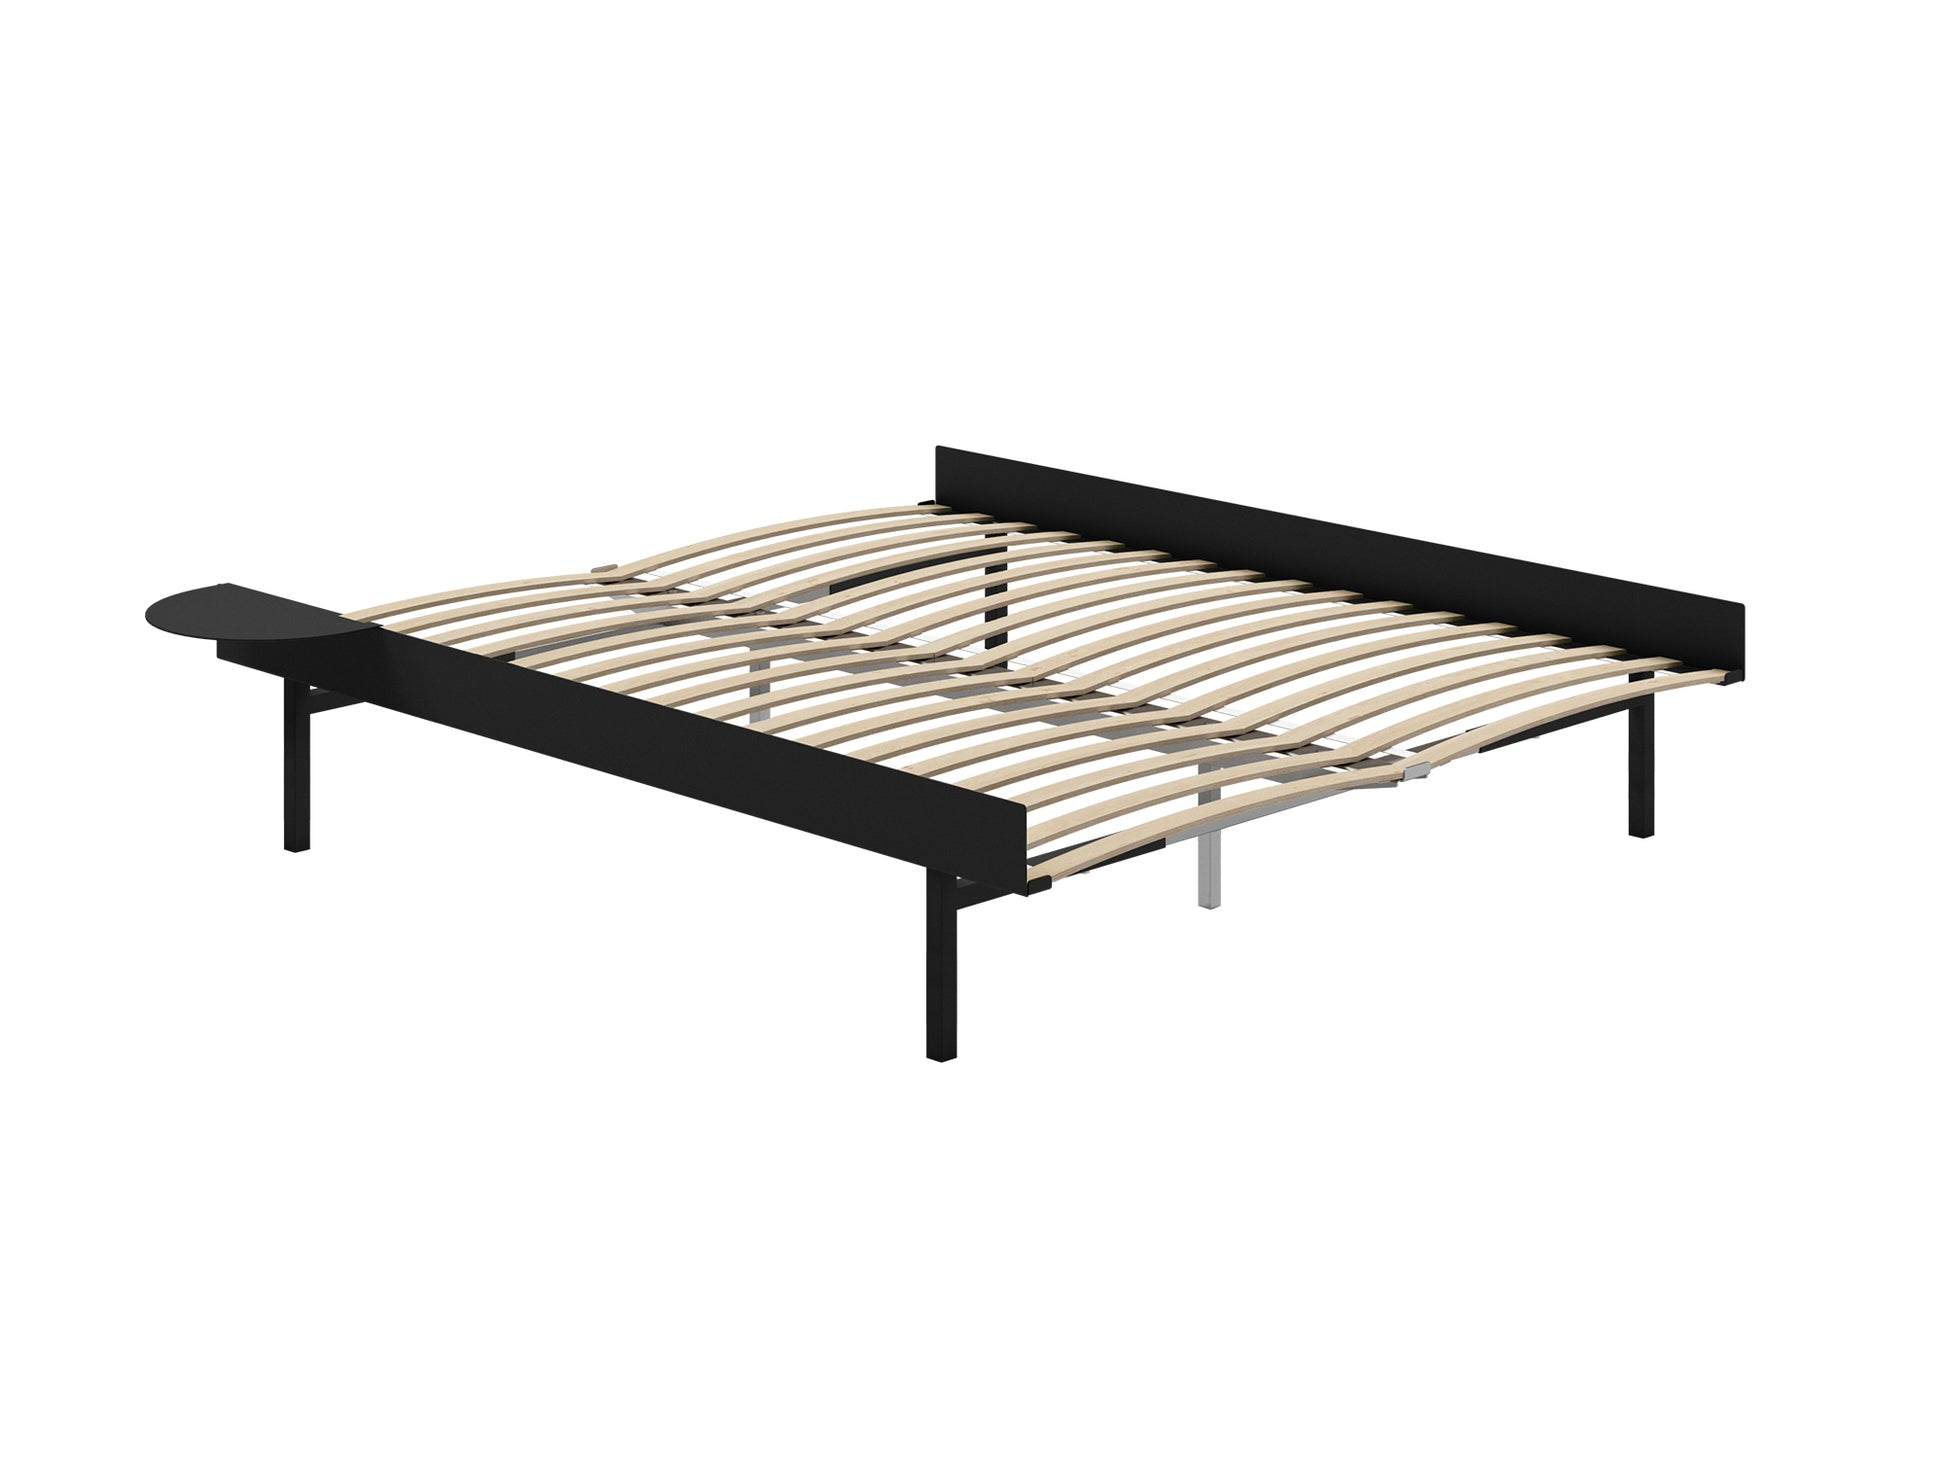 Bed 90 - 180 cm (High) by Moebe- Bed Frame / with 160cm wide Slats / 1 Side Table / Black